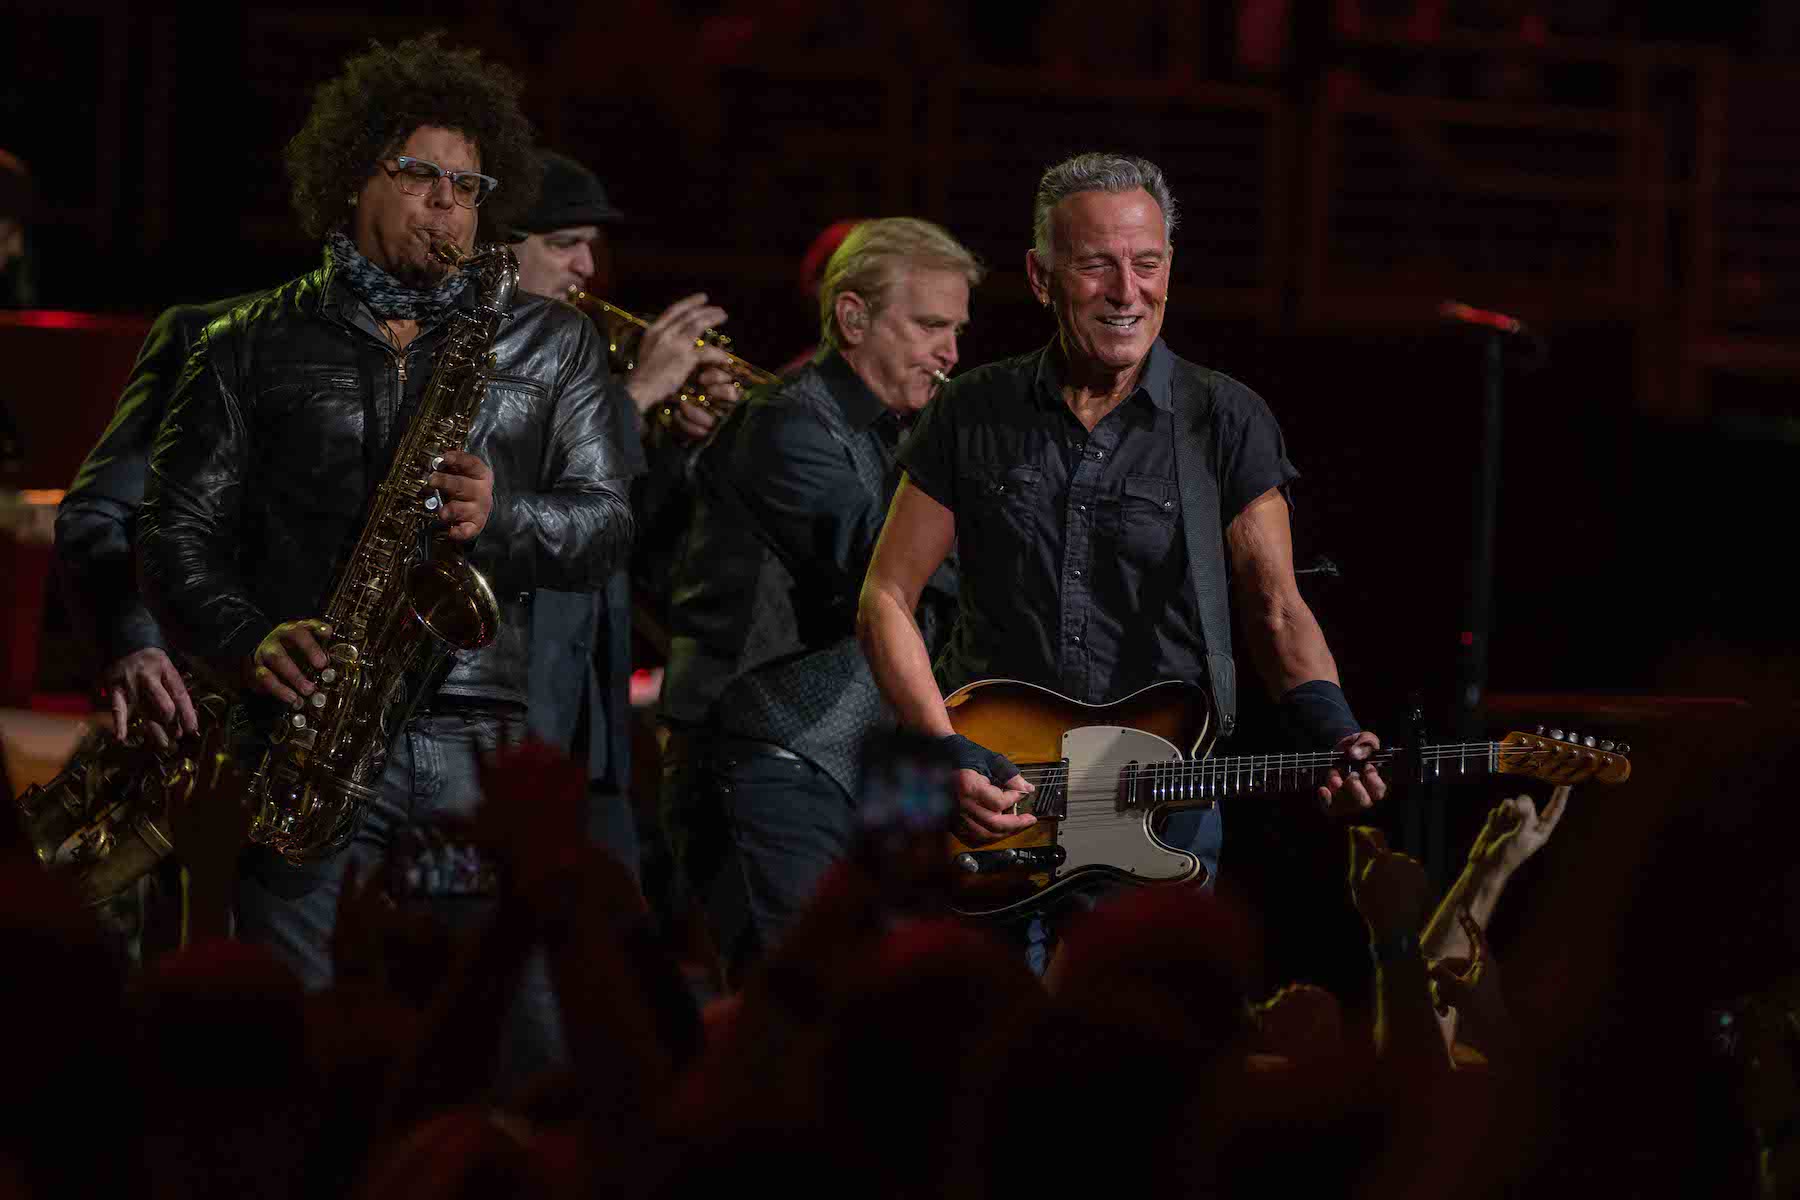 Bruce Springsteen & E Street Band at Capital One Arena, Washington, DC on March 27, 2023.